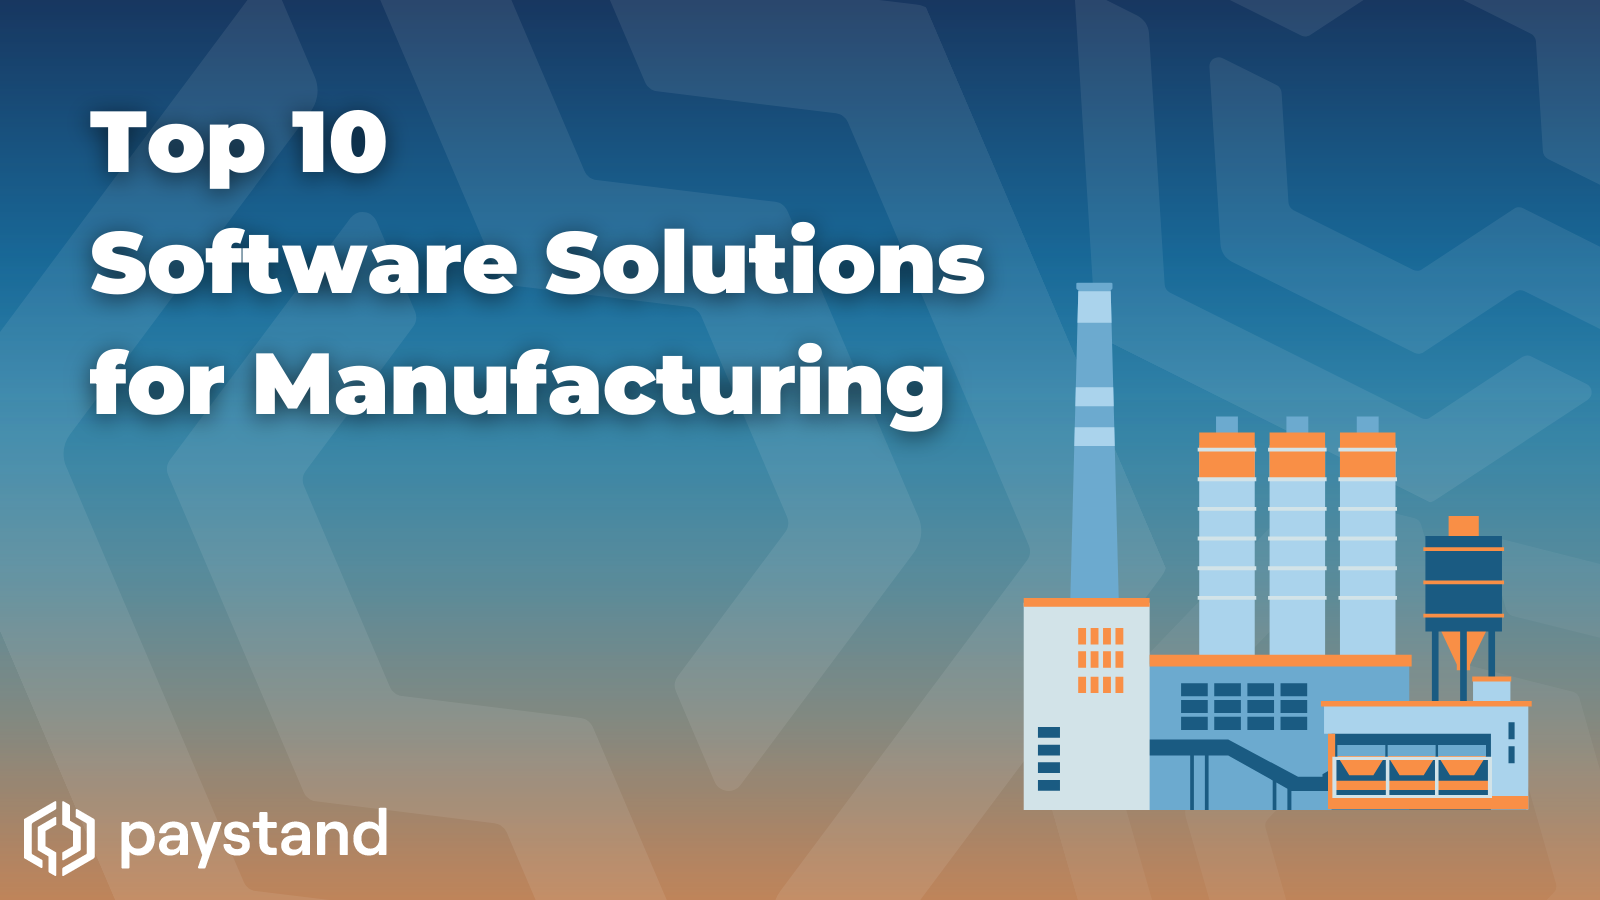 Top 10 Software Solutions for Manufacturing